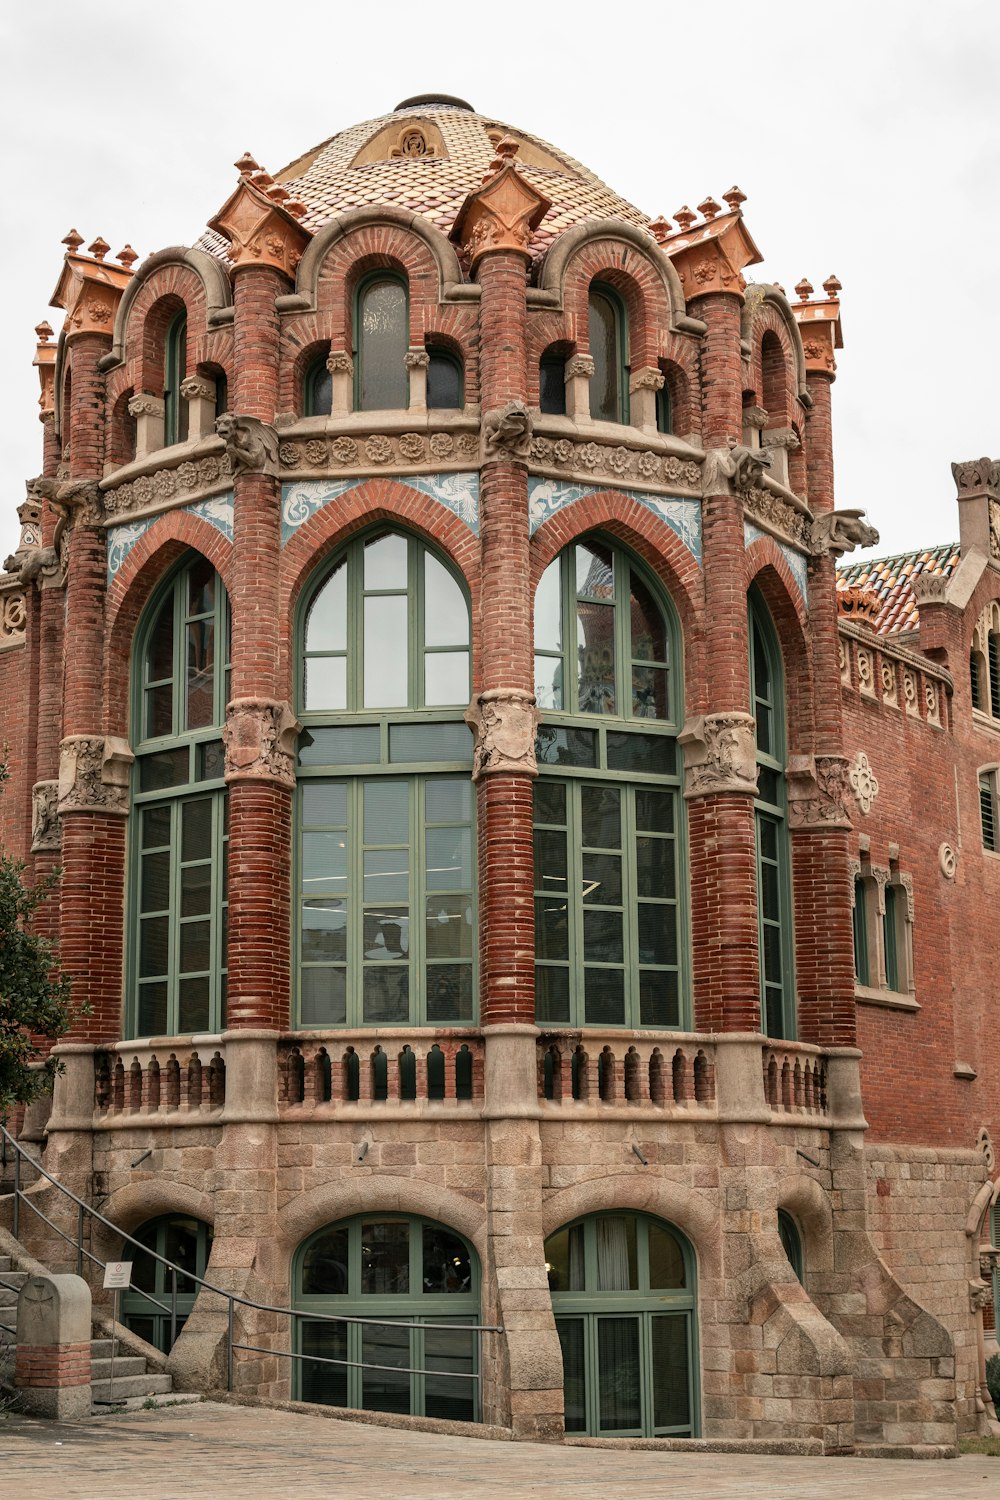 a large red brick building with arched windows